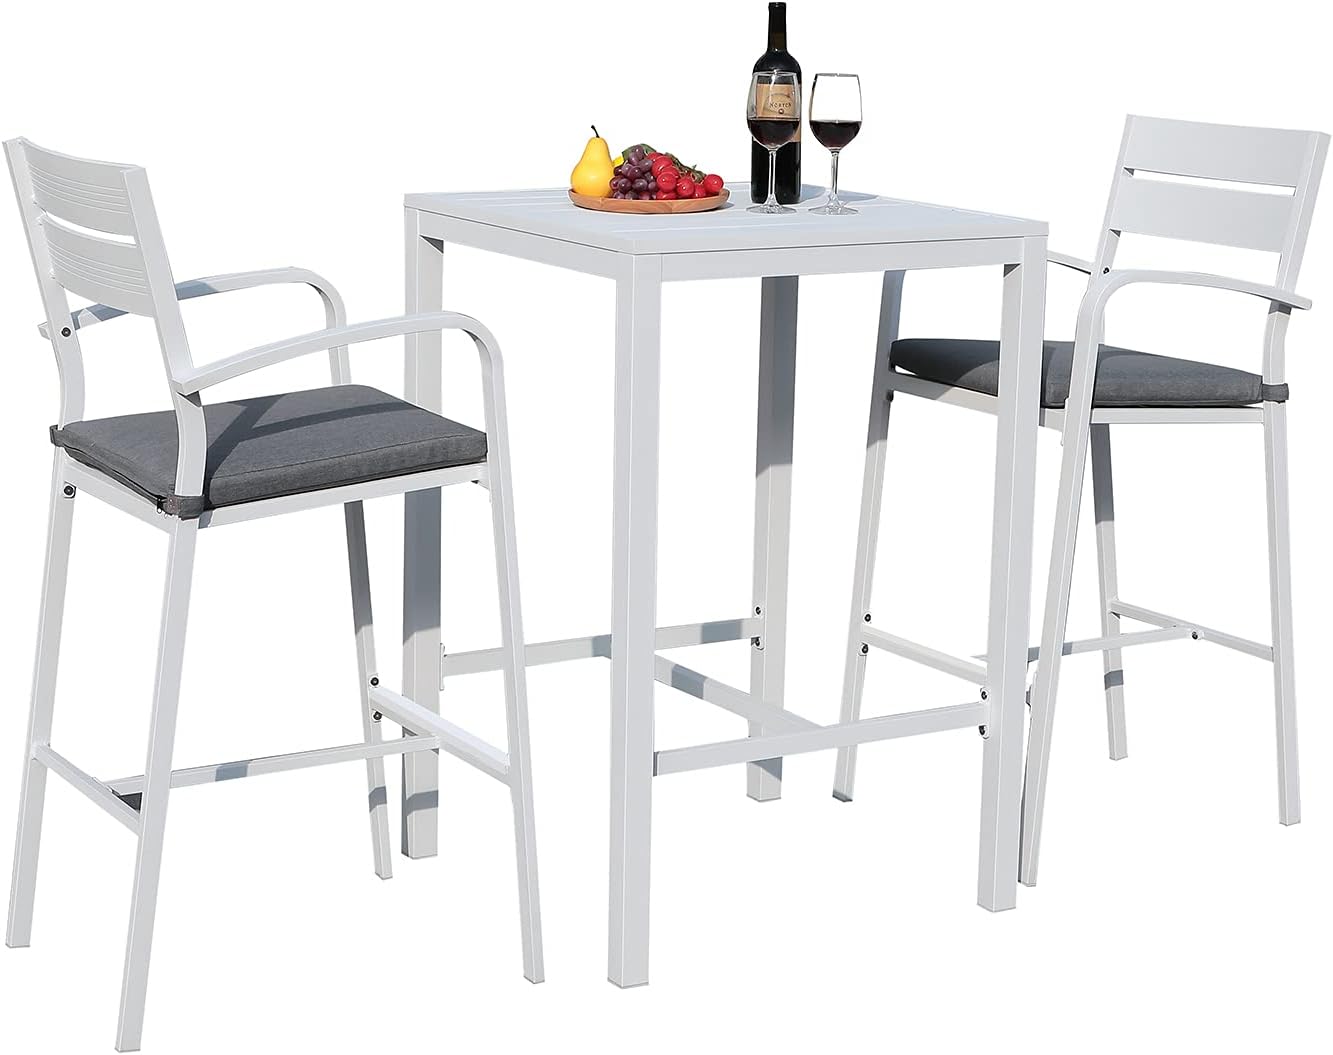 Soleil Jardin Aluminum Outdoor Bar Set, 3-Piece Outdoor Bar Height Table and Chairs Set, Counter Height Bar Stools with Cushions & Slatted High Top Bar Table for Patios, Backyard, Poolside, White